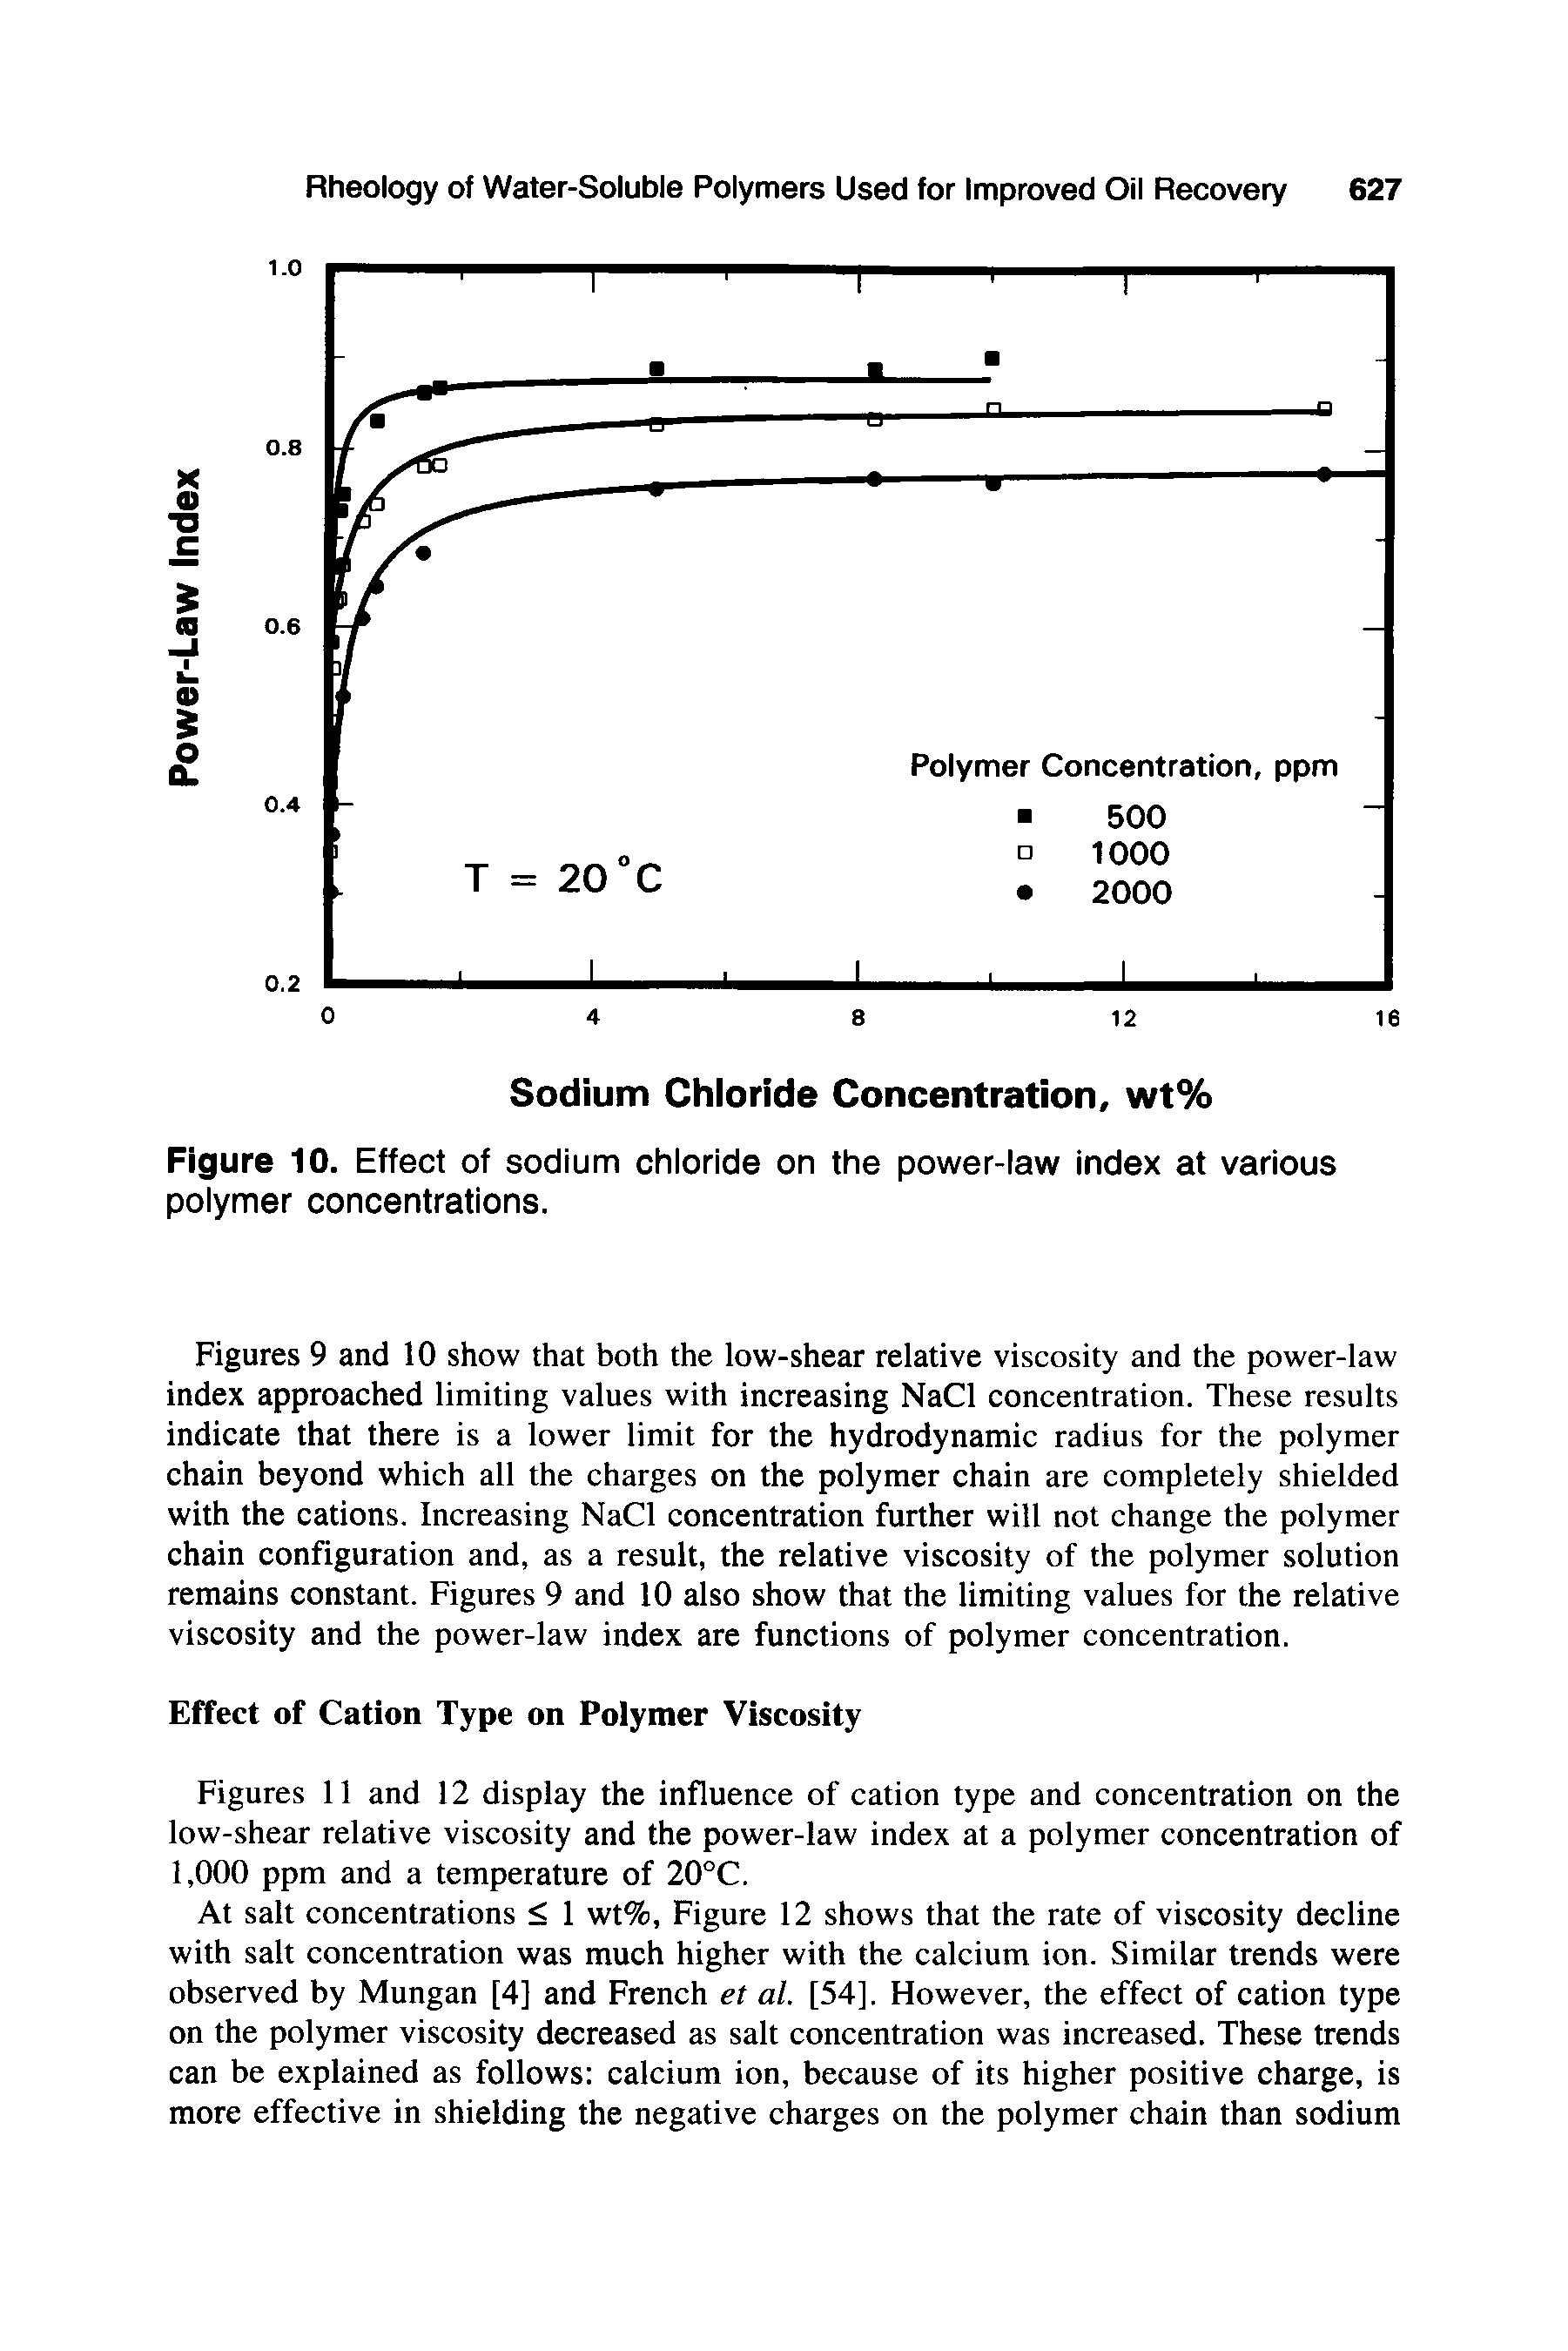 Figures 11 and 12 display the influence of cation type and concentration on the low-shear relative viscosity and the power-law index at a polymer concentration of 1,000 ppm and a temperature of 20°C.